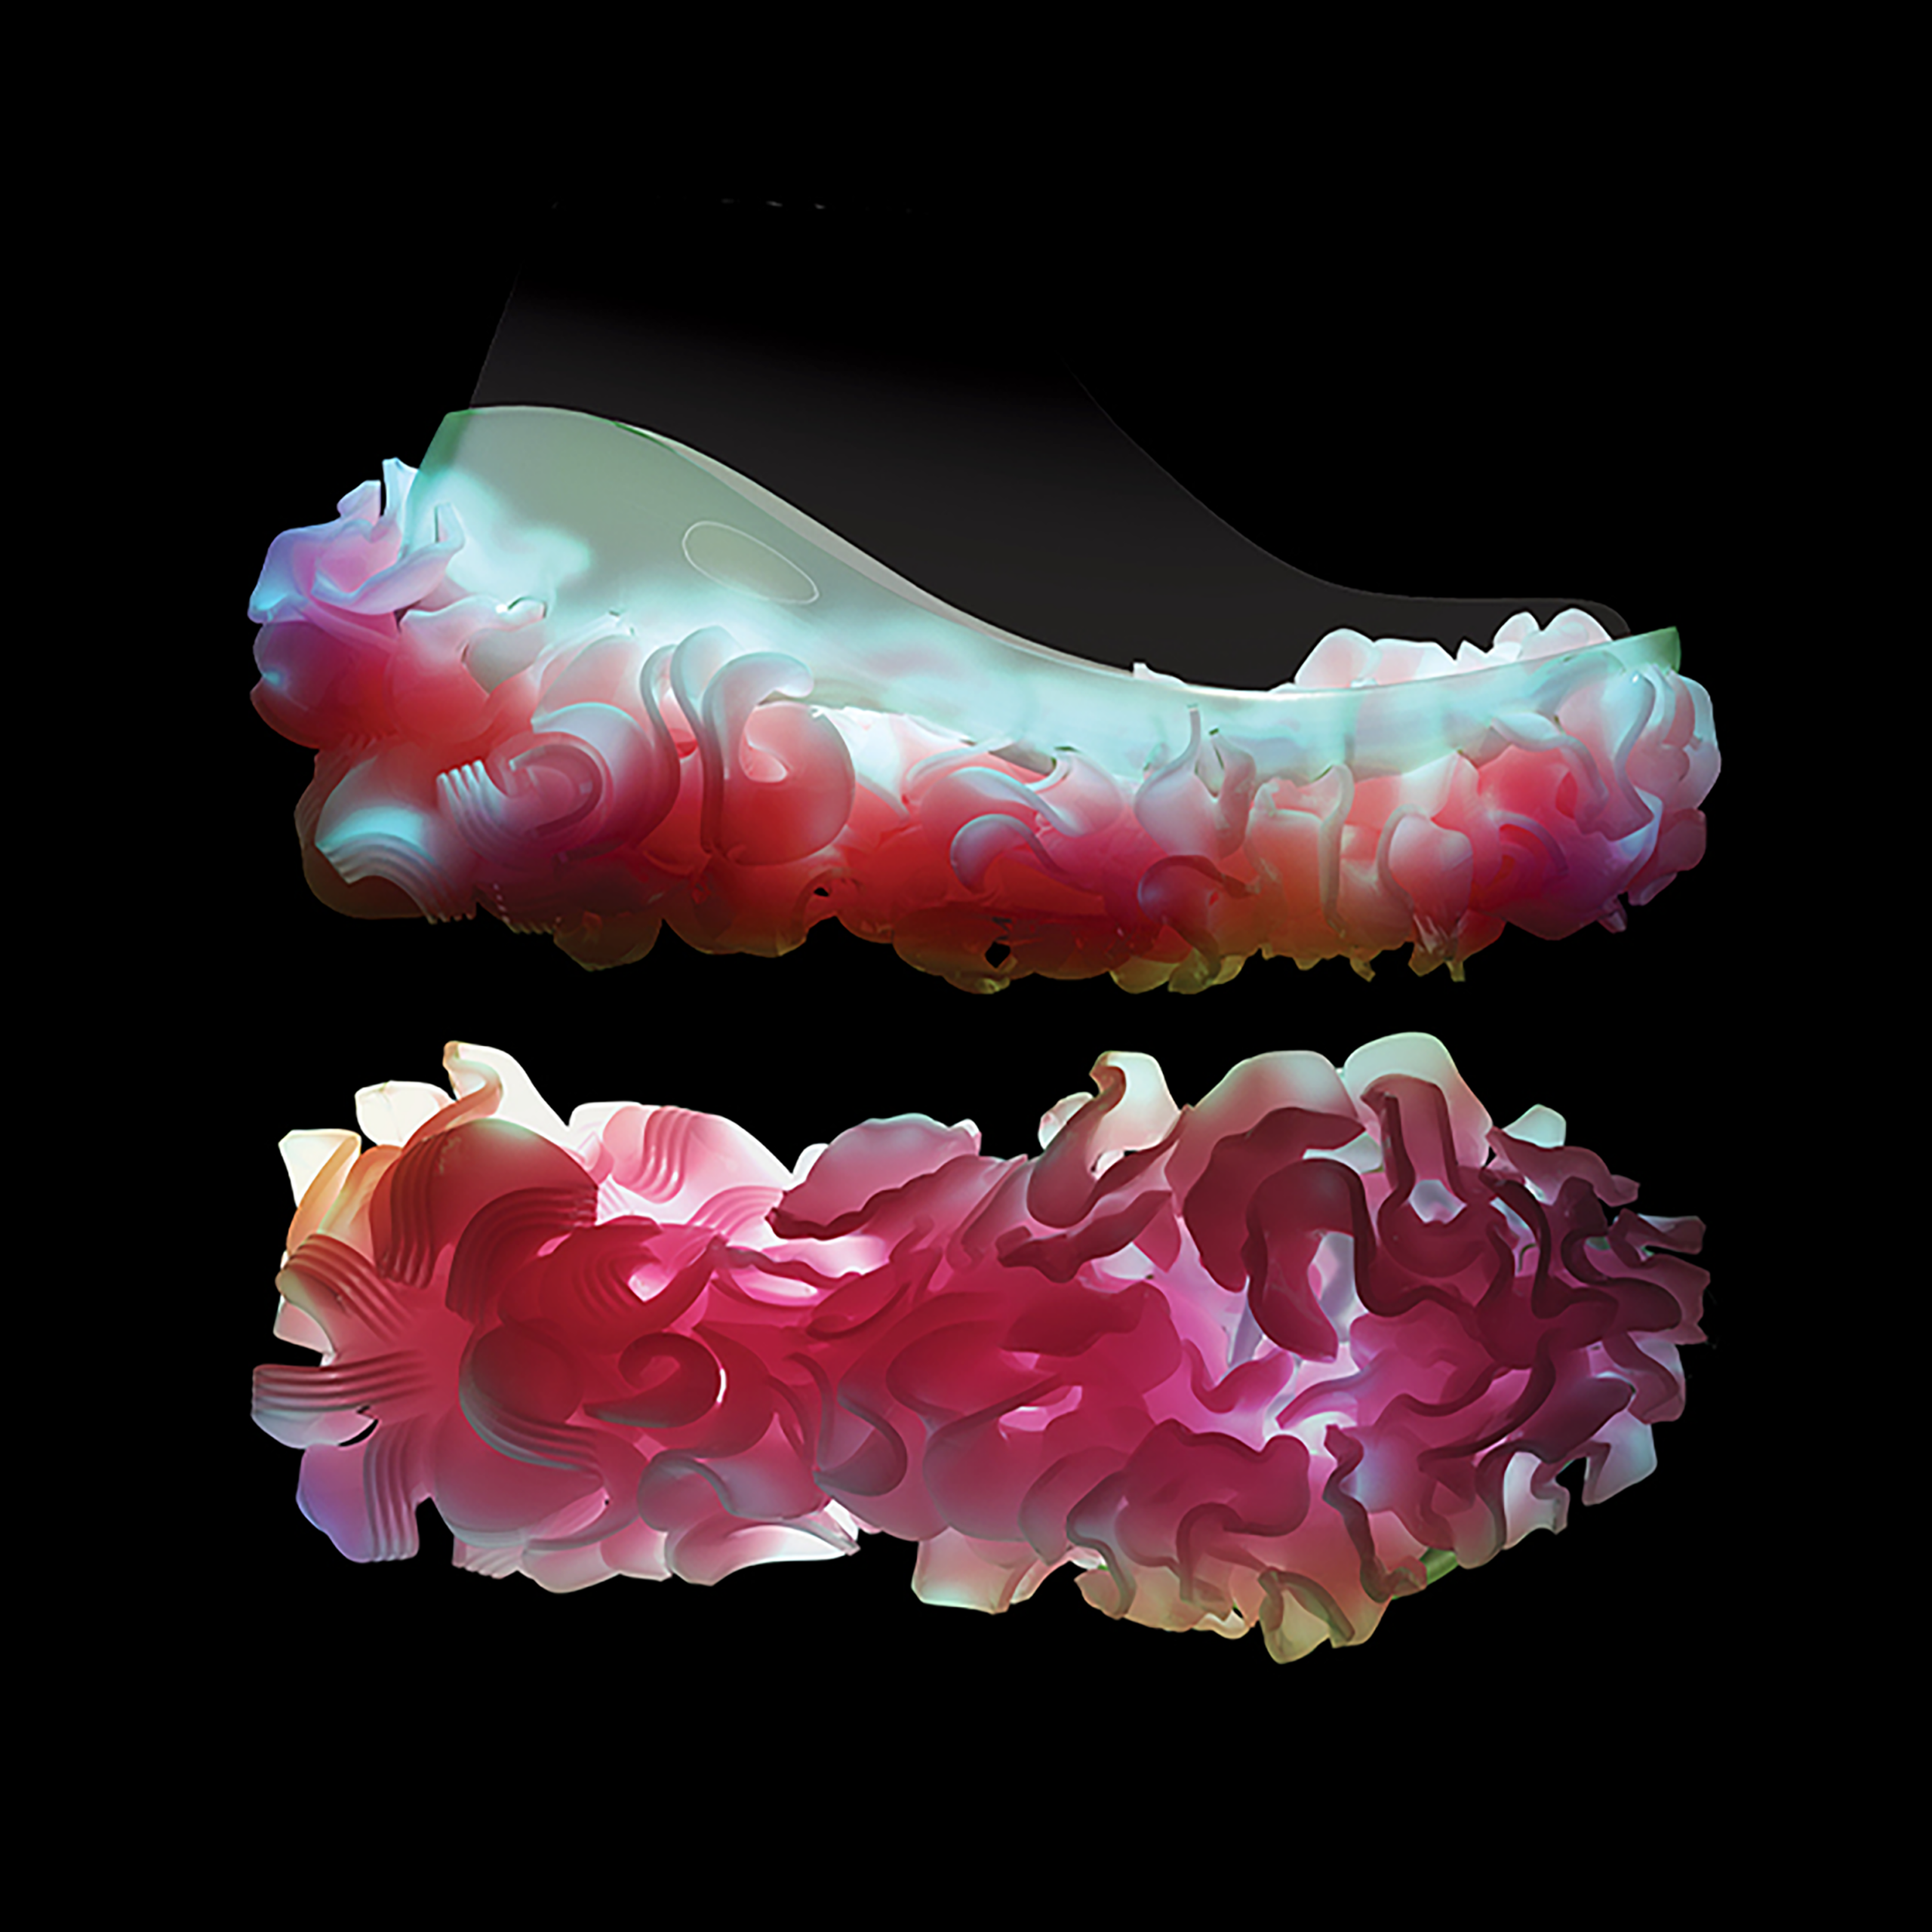 Digital image of two shoes, one with a side view and the other with a bottom view on a black background. The bottoms are glowing pink, yellow, blue, white and green. The bottom is made of countless swirling folds, resembling blooming flower petals.